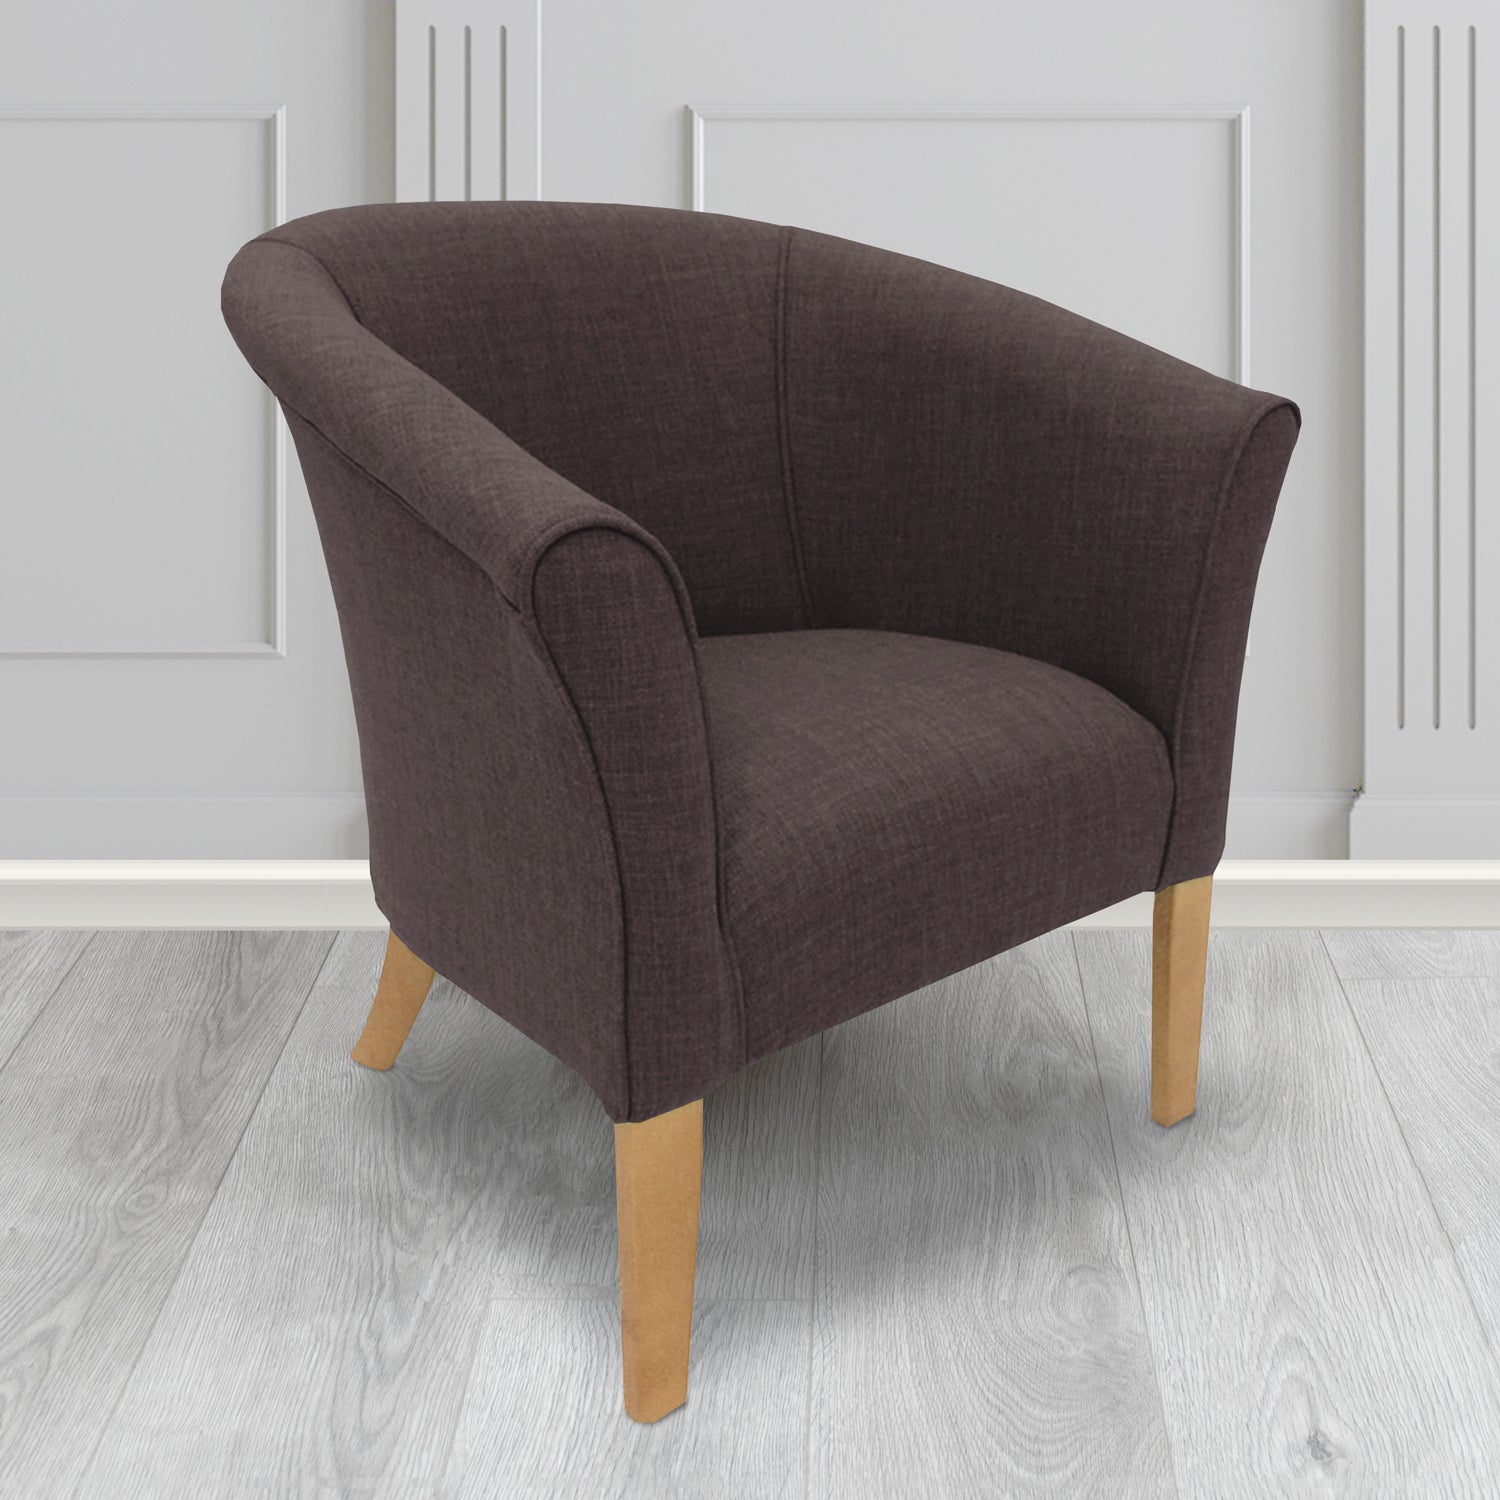 Quill Tub Chair in Linetta Truffle Crib 5 Plain Fabric - Antimicrobial, Stain Resistant & Waterproof - The Tub Chair Shop